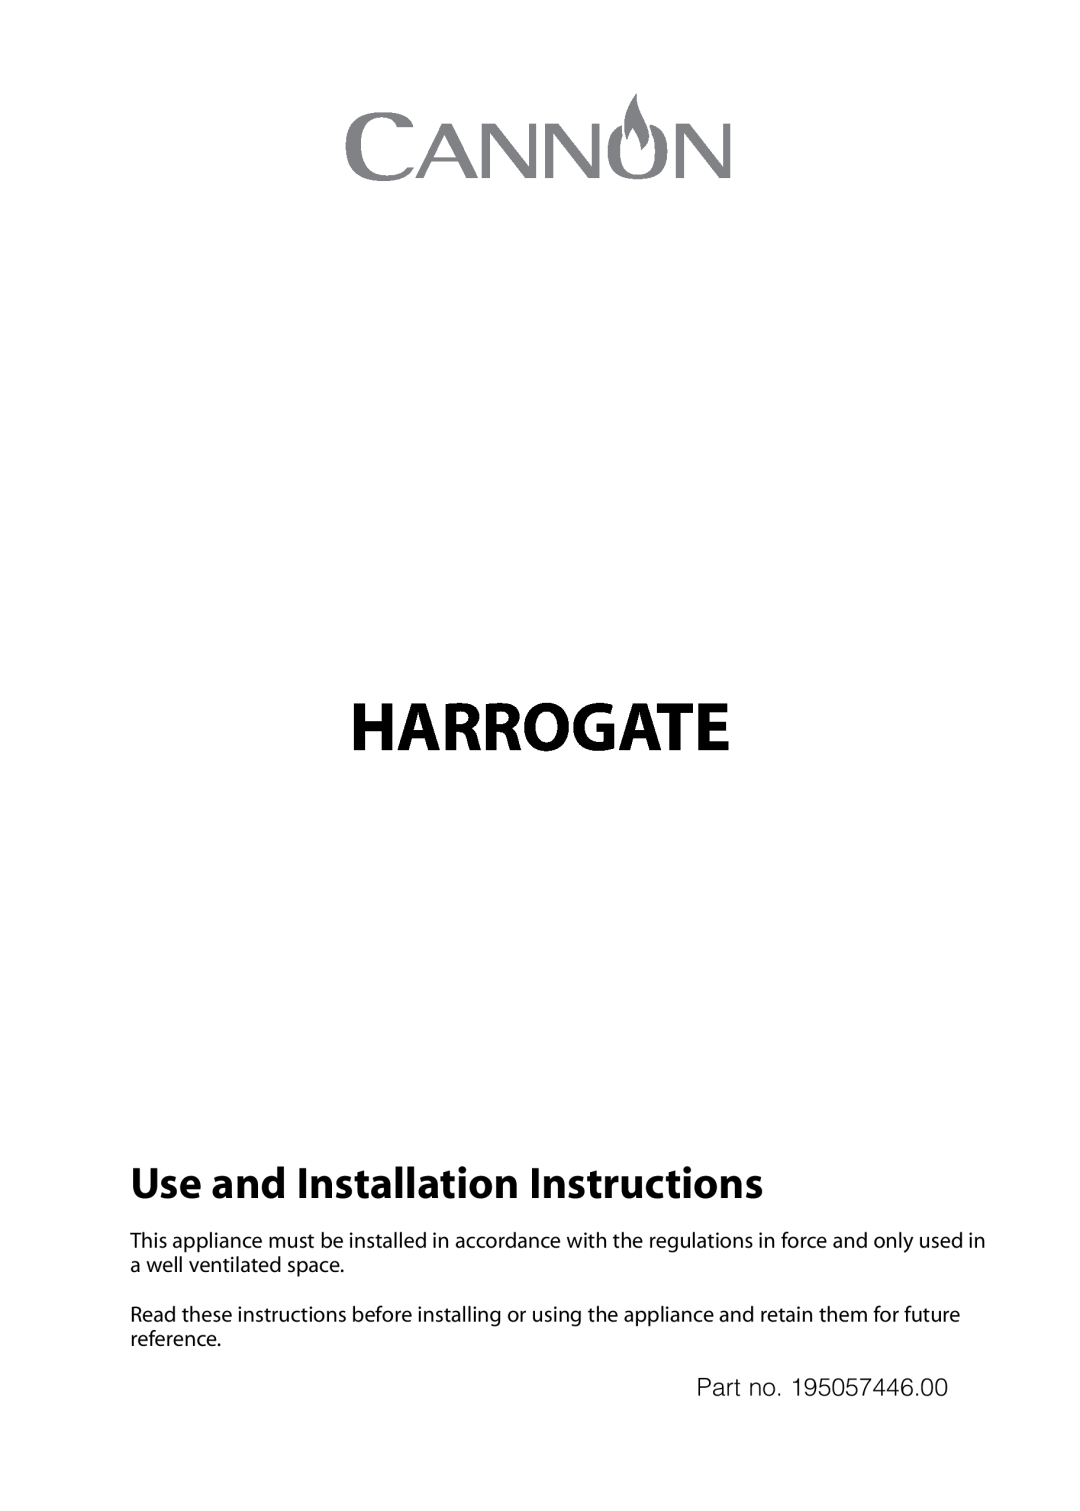 Cannon C60DH installation instructions Use and Installation Instructions, Harrogate 